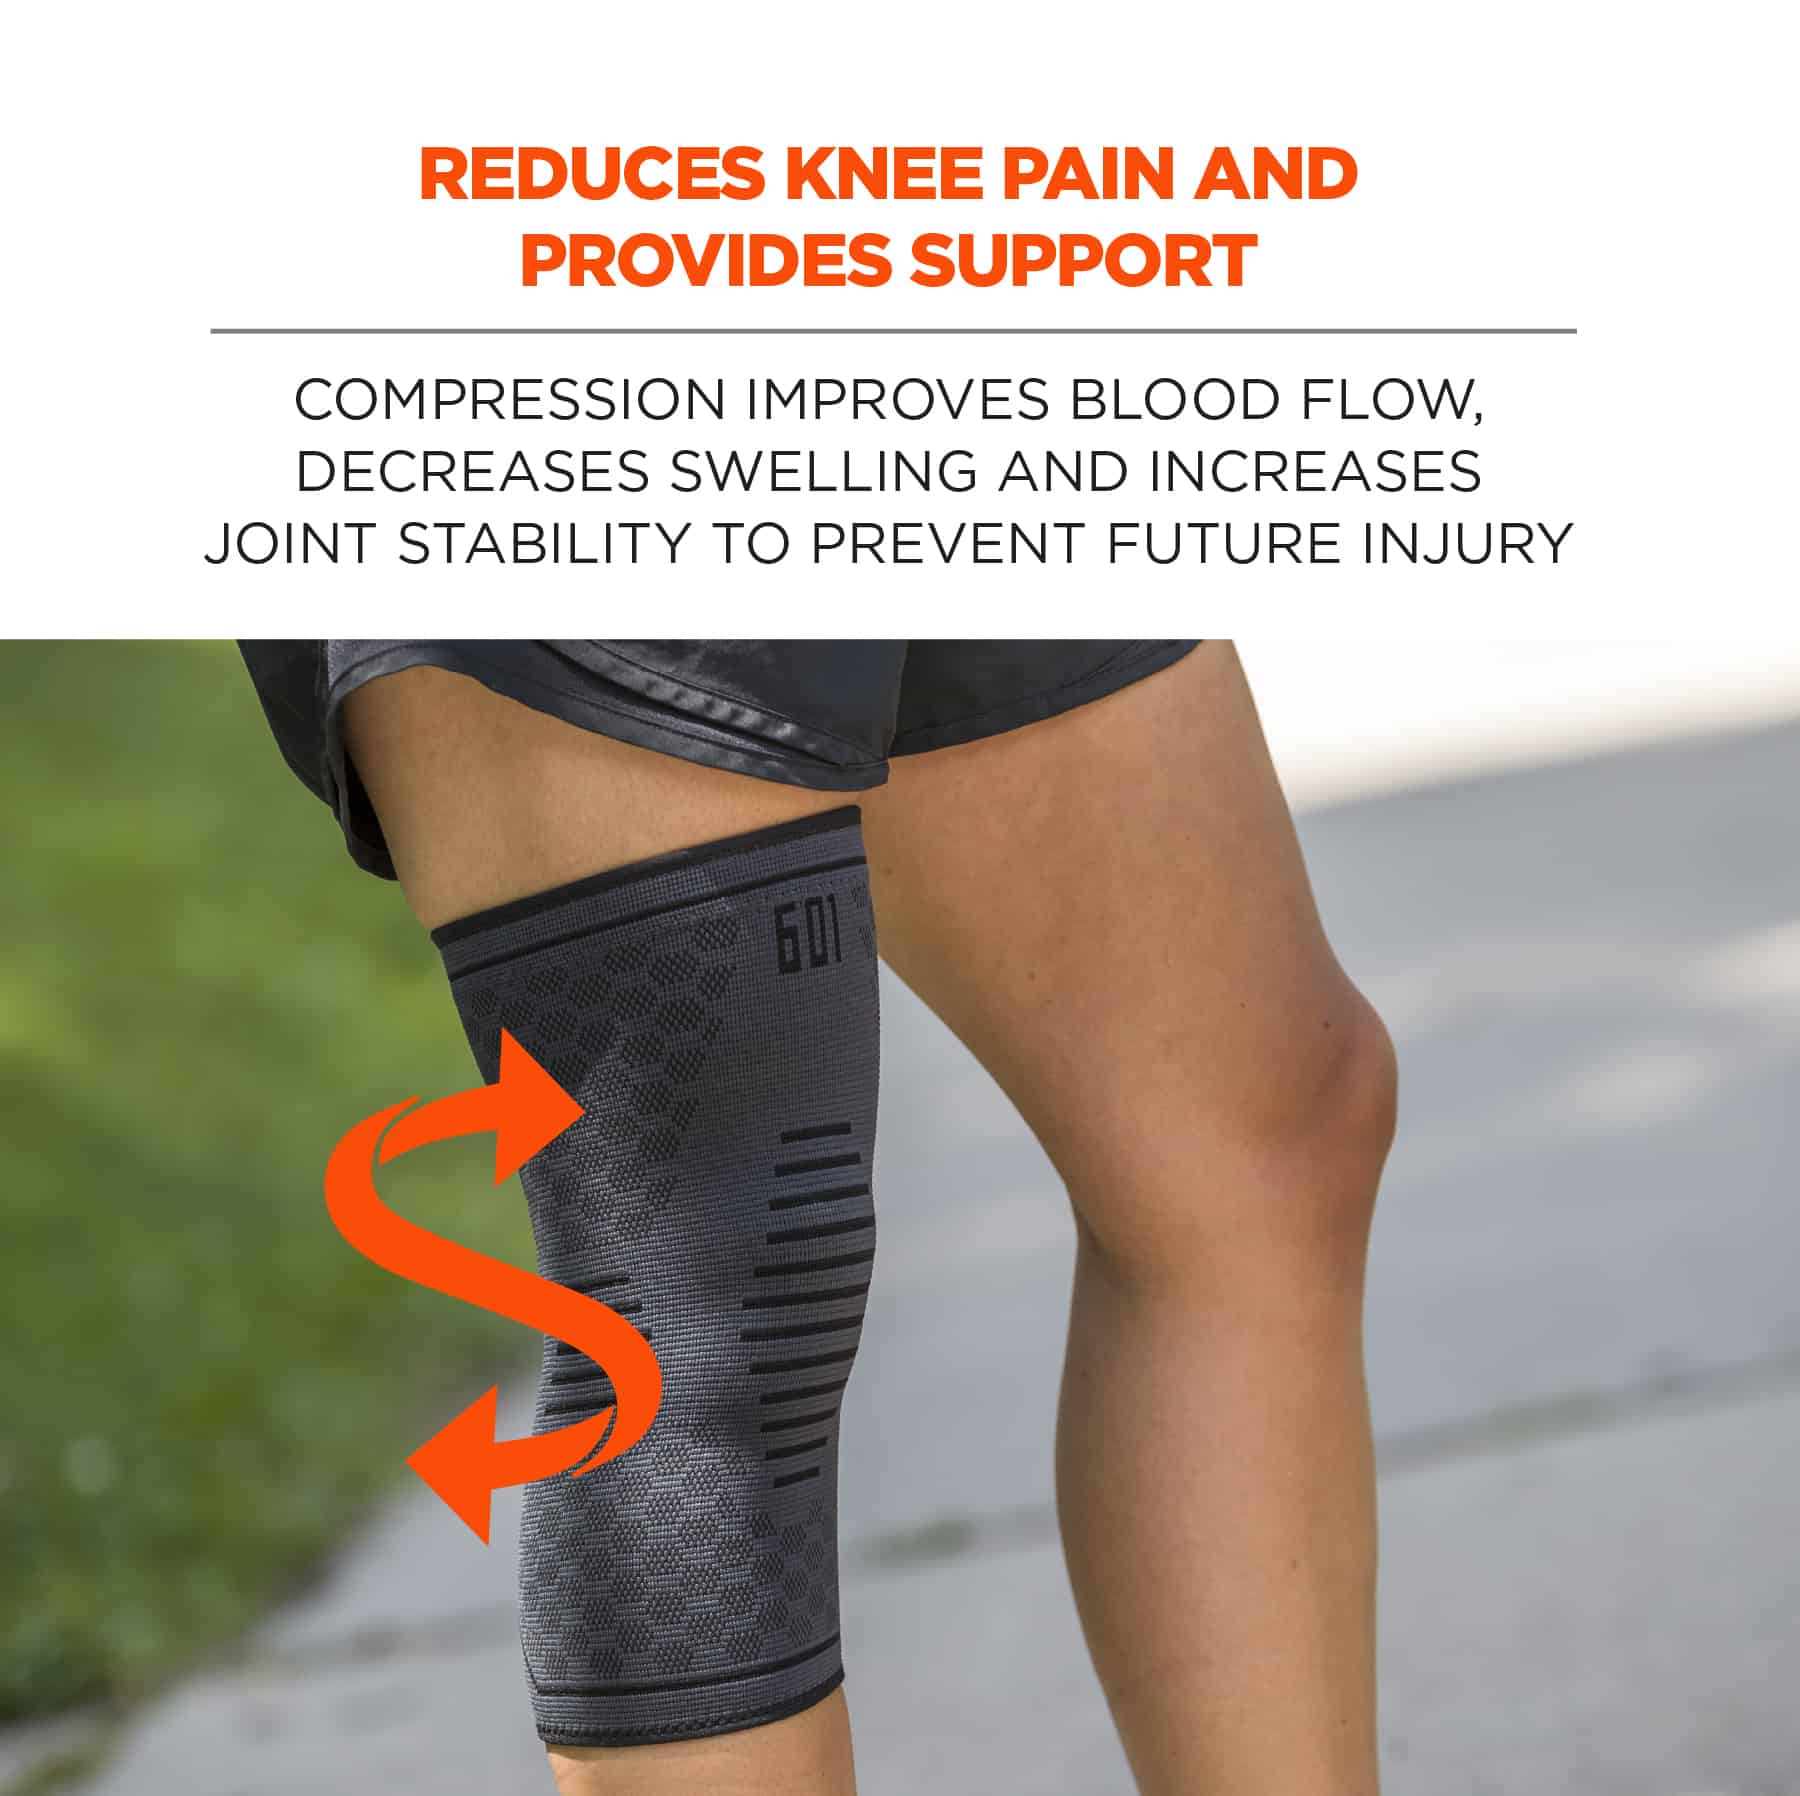 https://www.ergodyne.com/sites/default/files/product-images/16552-601-knee-compression-sleeves-reduces-knee-pain-and-provides-support.jpg